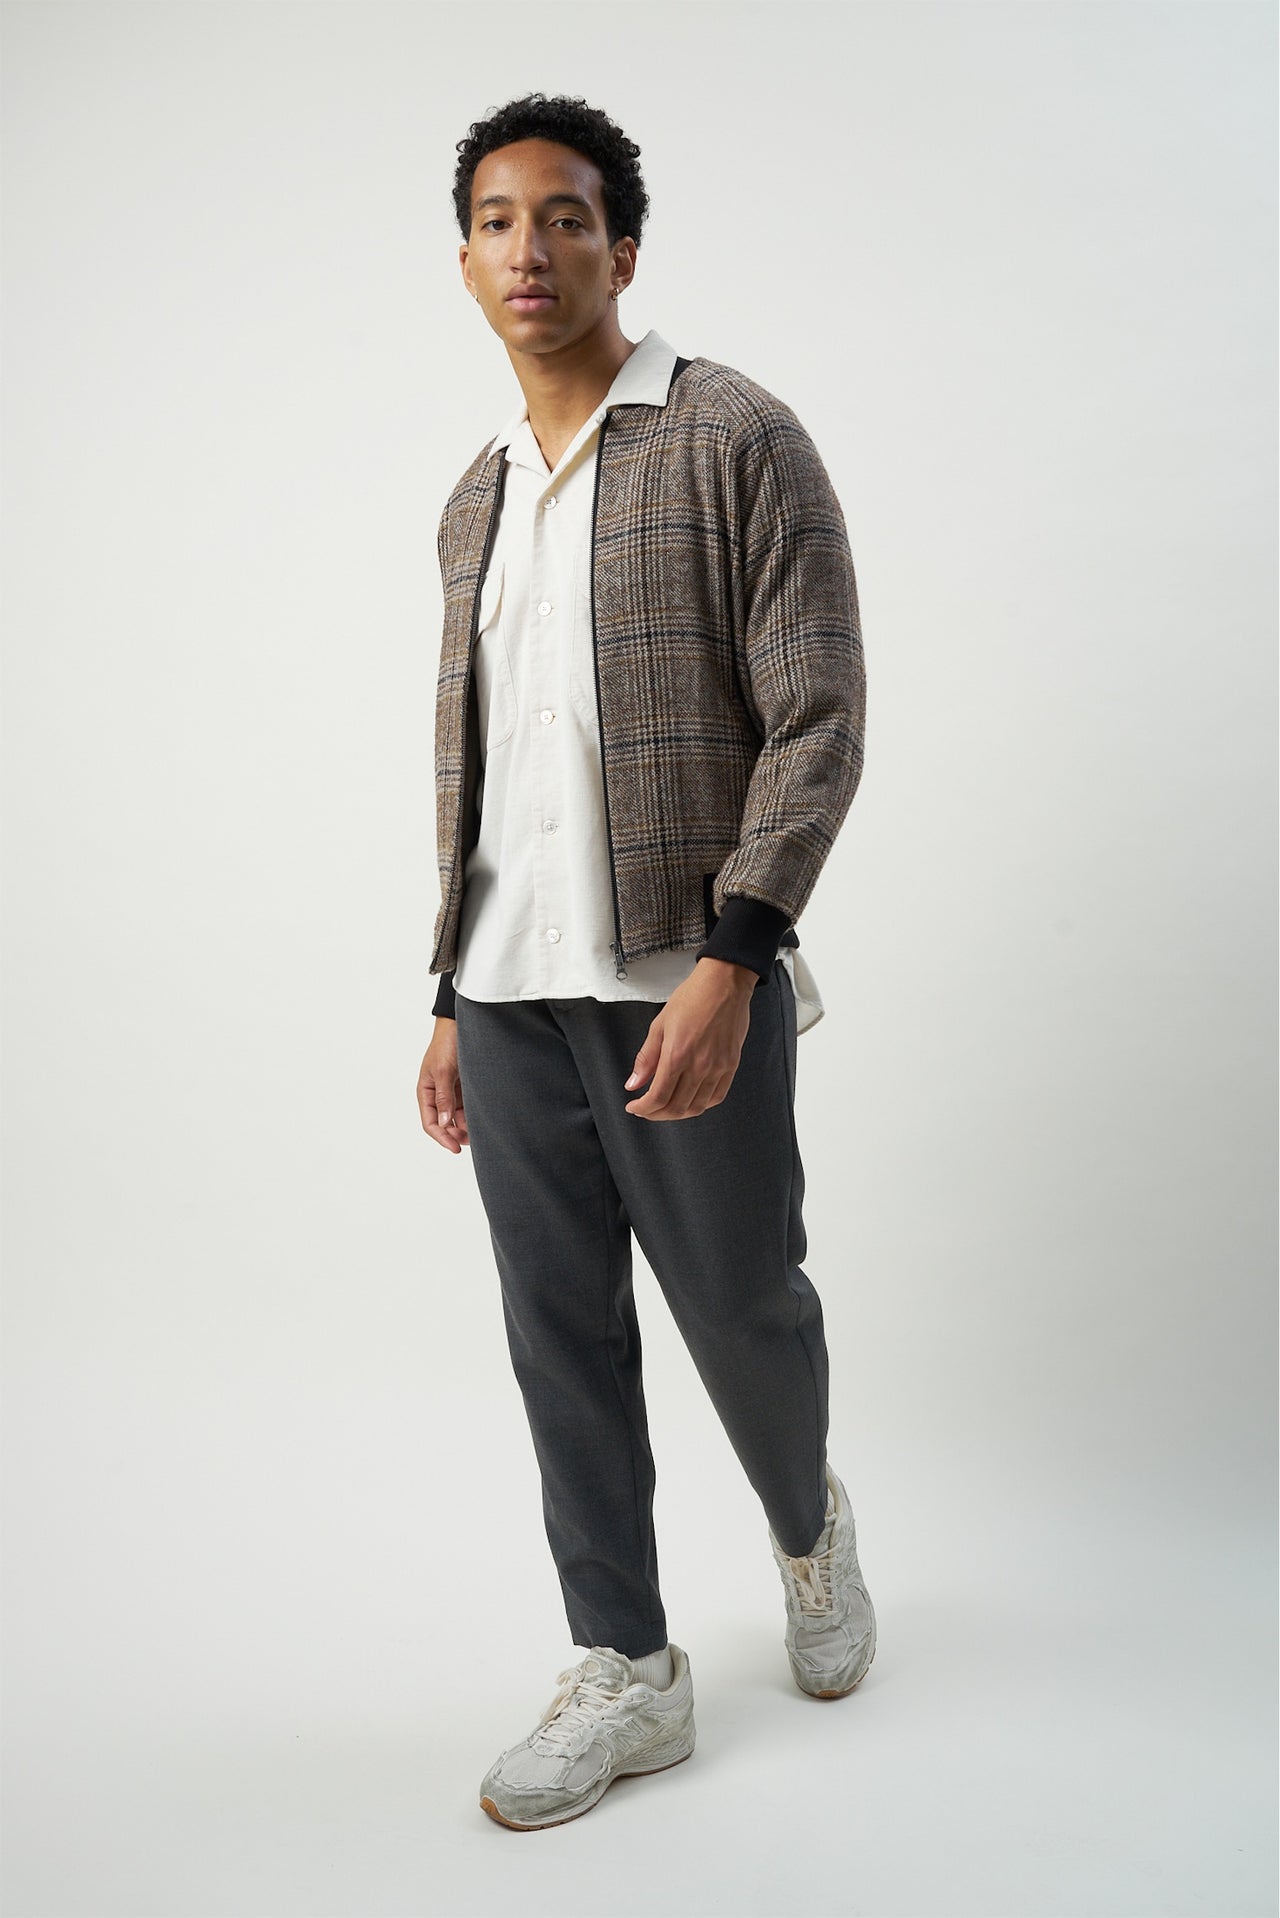 Bomber Jacket in a Soft Brown Checquered Italian Wool